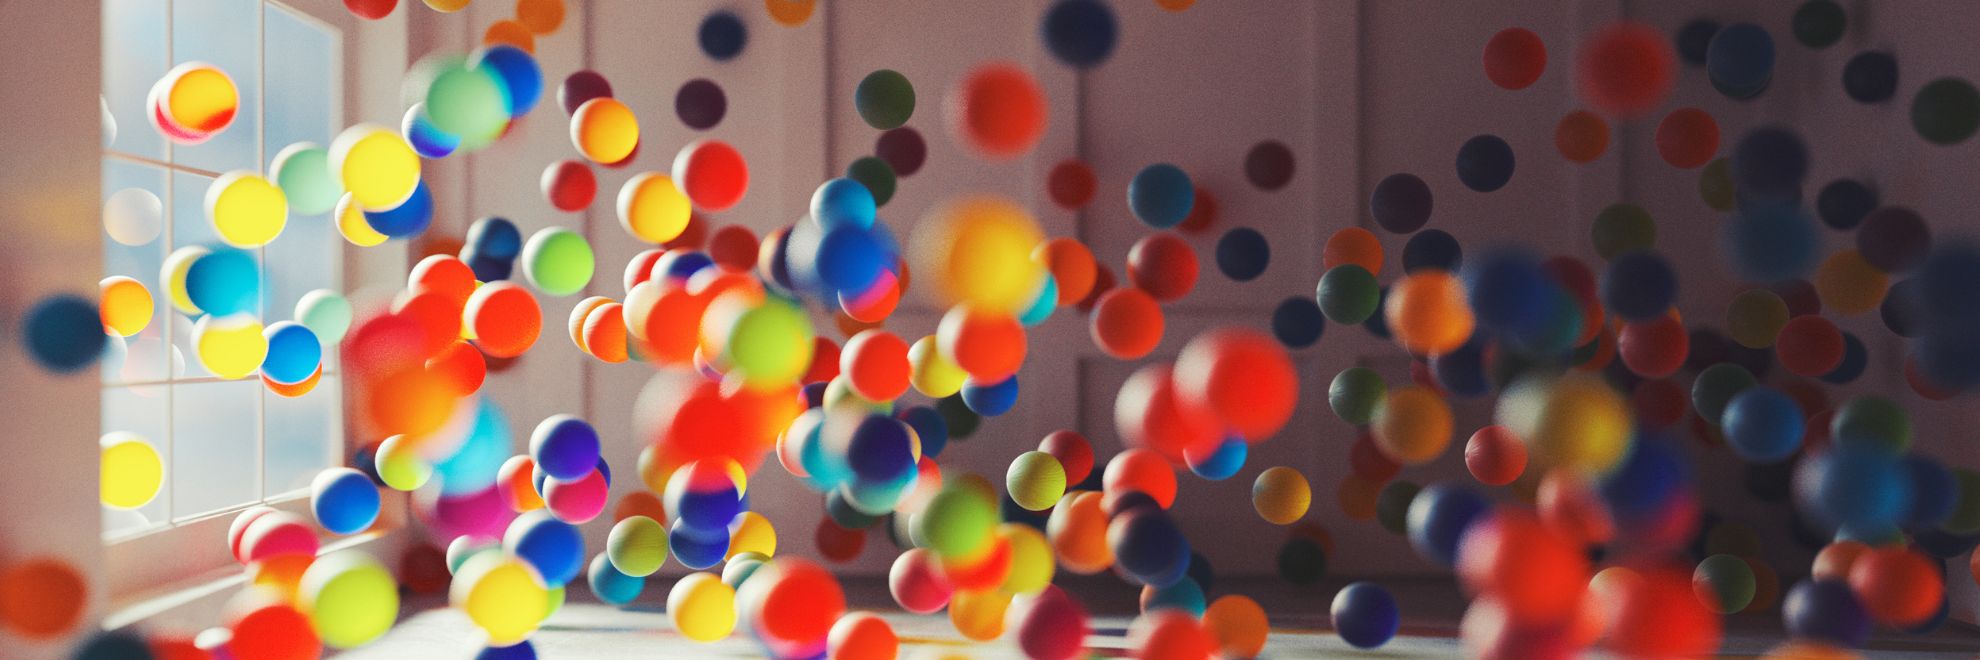 Photo of Colorful Balloons in a Room - The Future of Sports